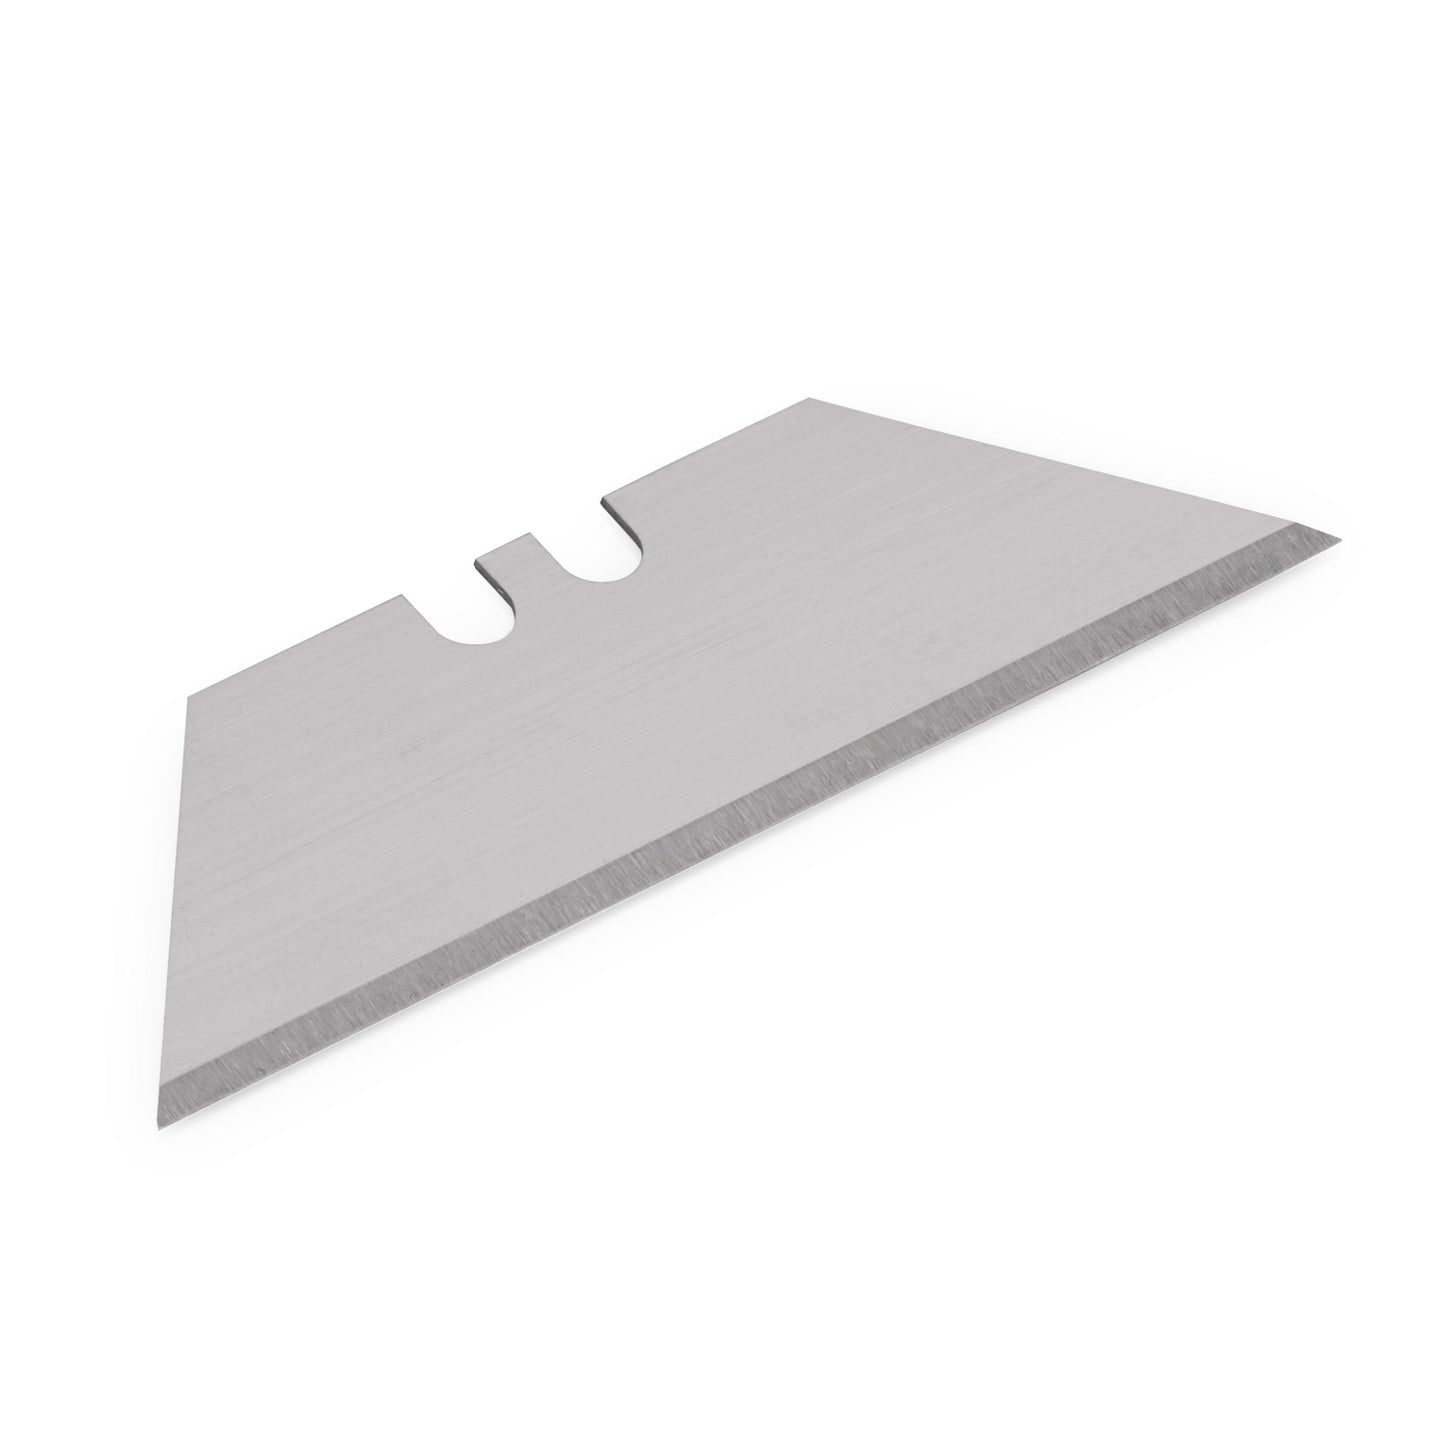 Transotype Spare Blades for Cutter Pro (10-pakk)